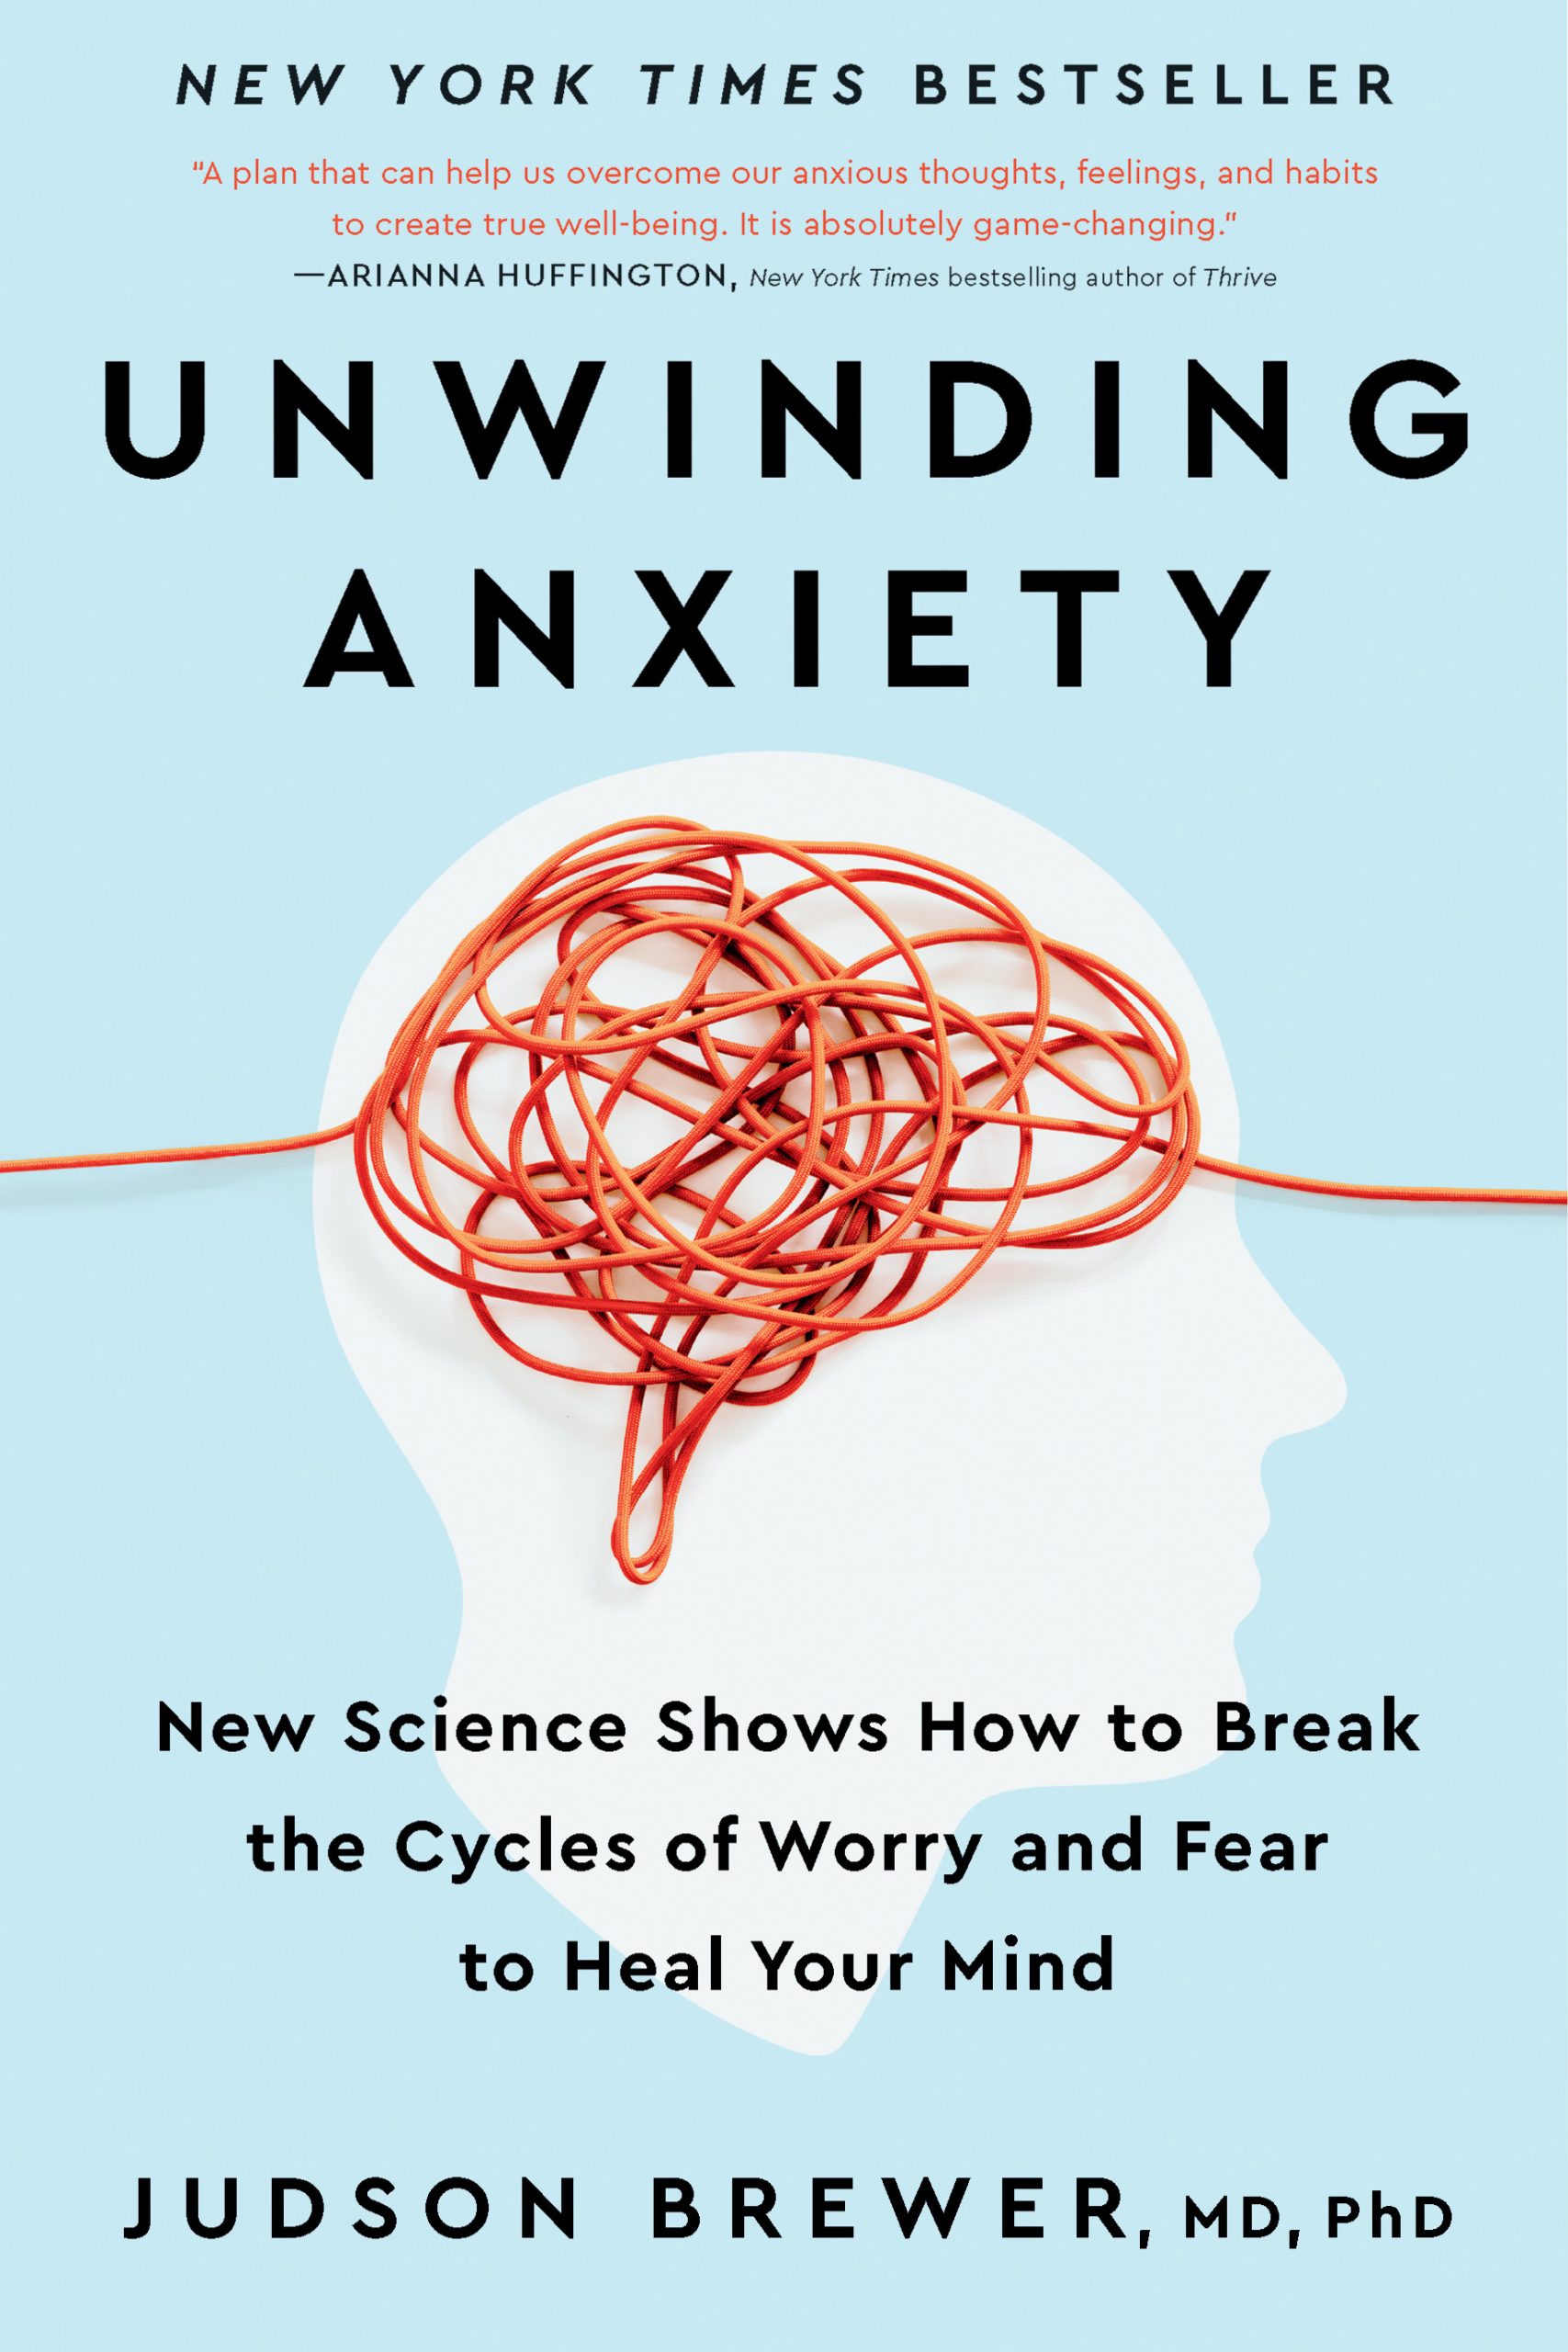 https://drjud.com/wp-content/uploads/2021/04/UnwindingAnxiety-Cover-NYTimes-Bestseller-scaled.jpg